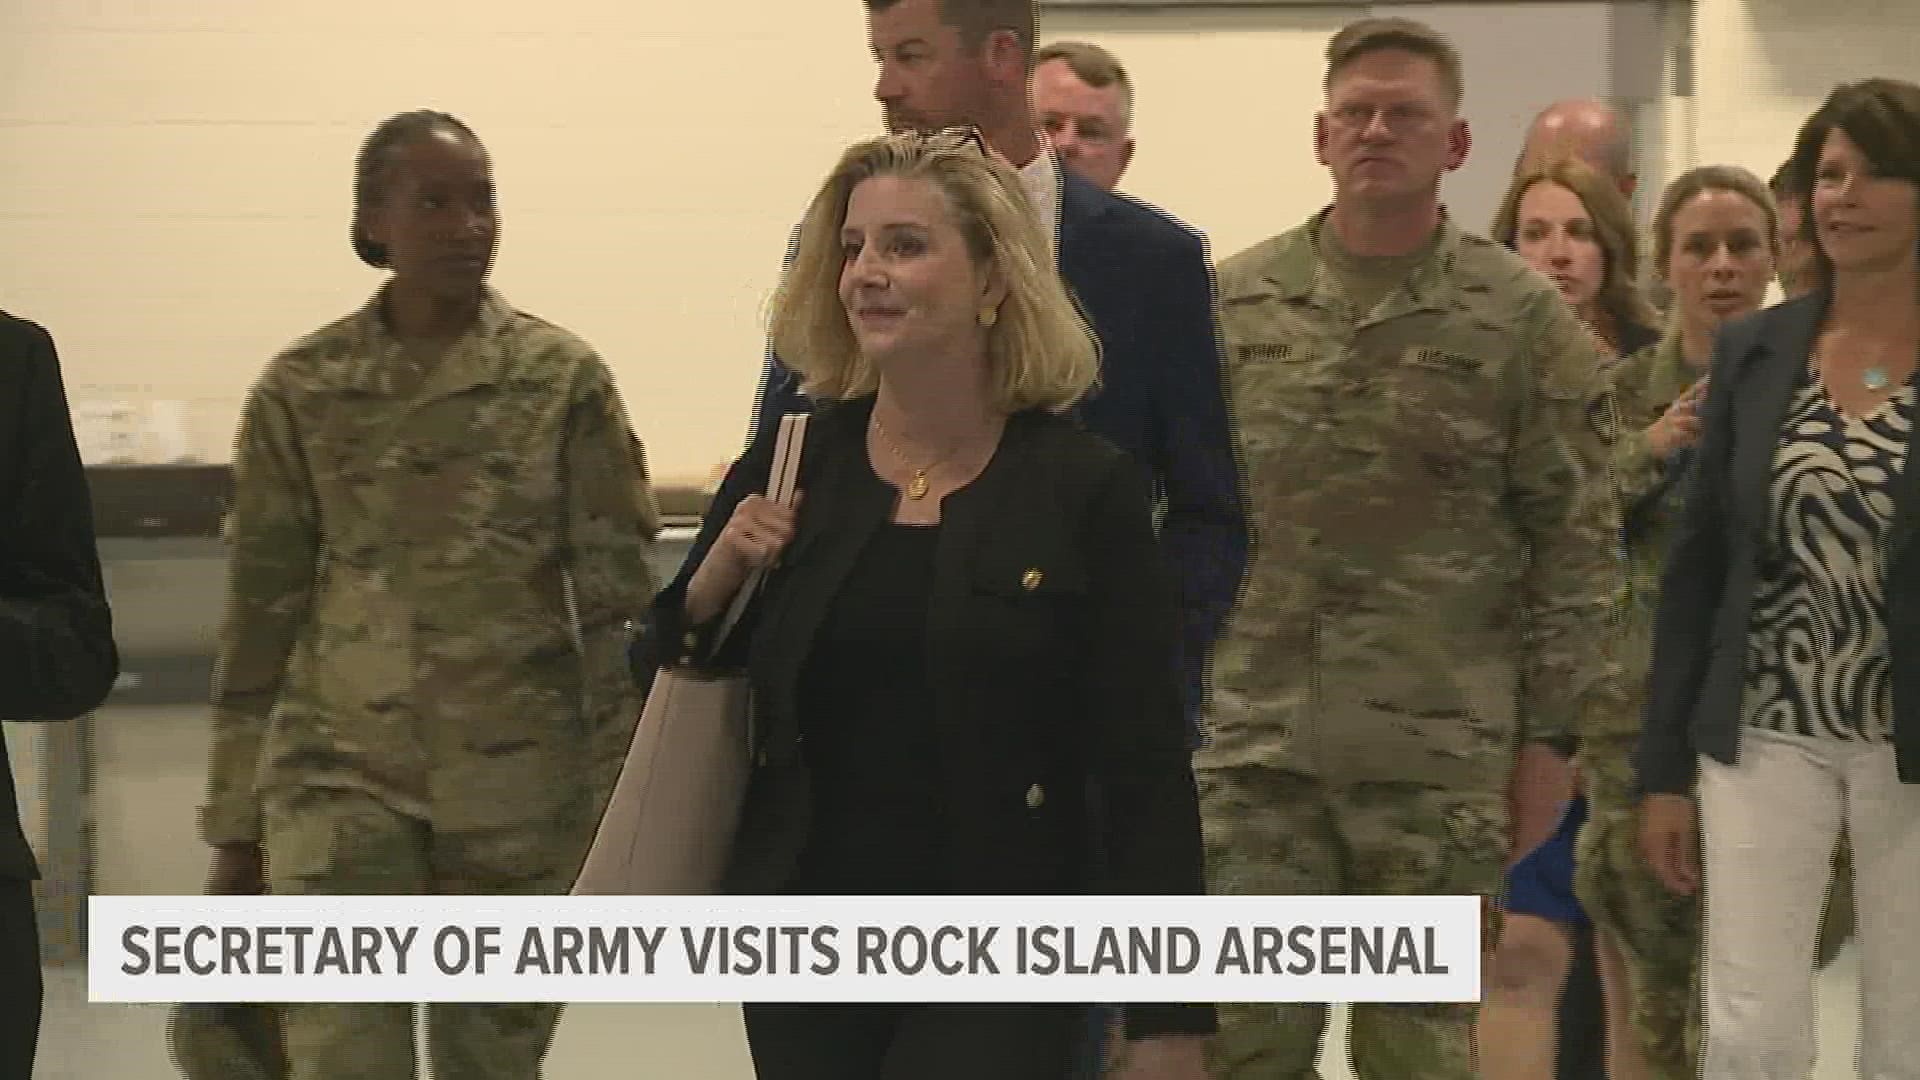 Secretary Christine Wormouth said that Quad Citizens do not need to worry about a base closure at the Rock Island Arsenal, amidst Operation BRAC.